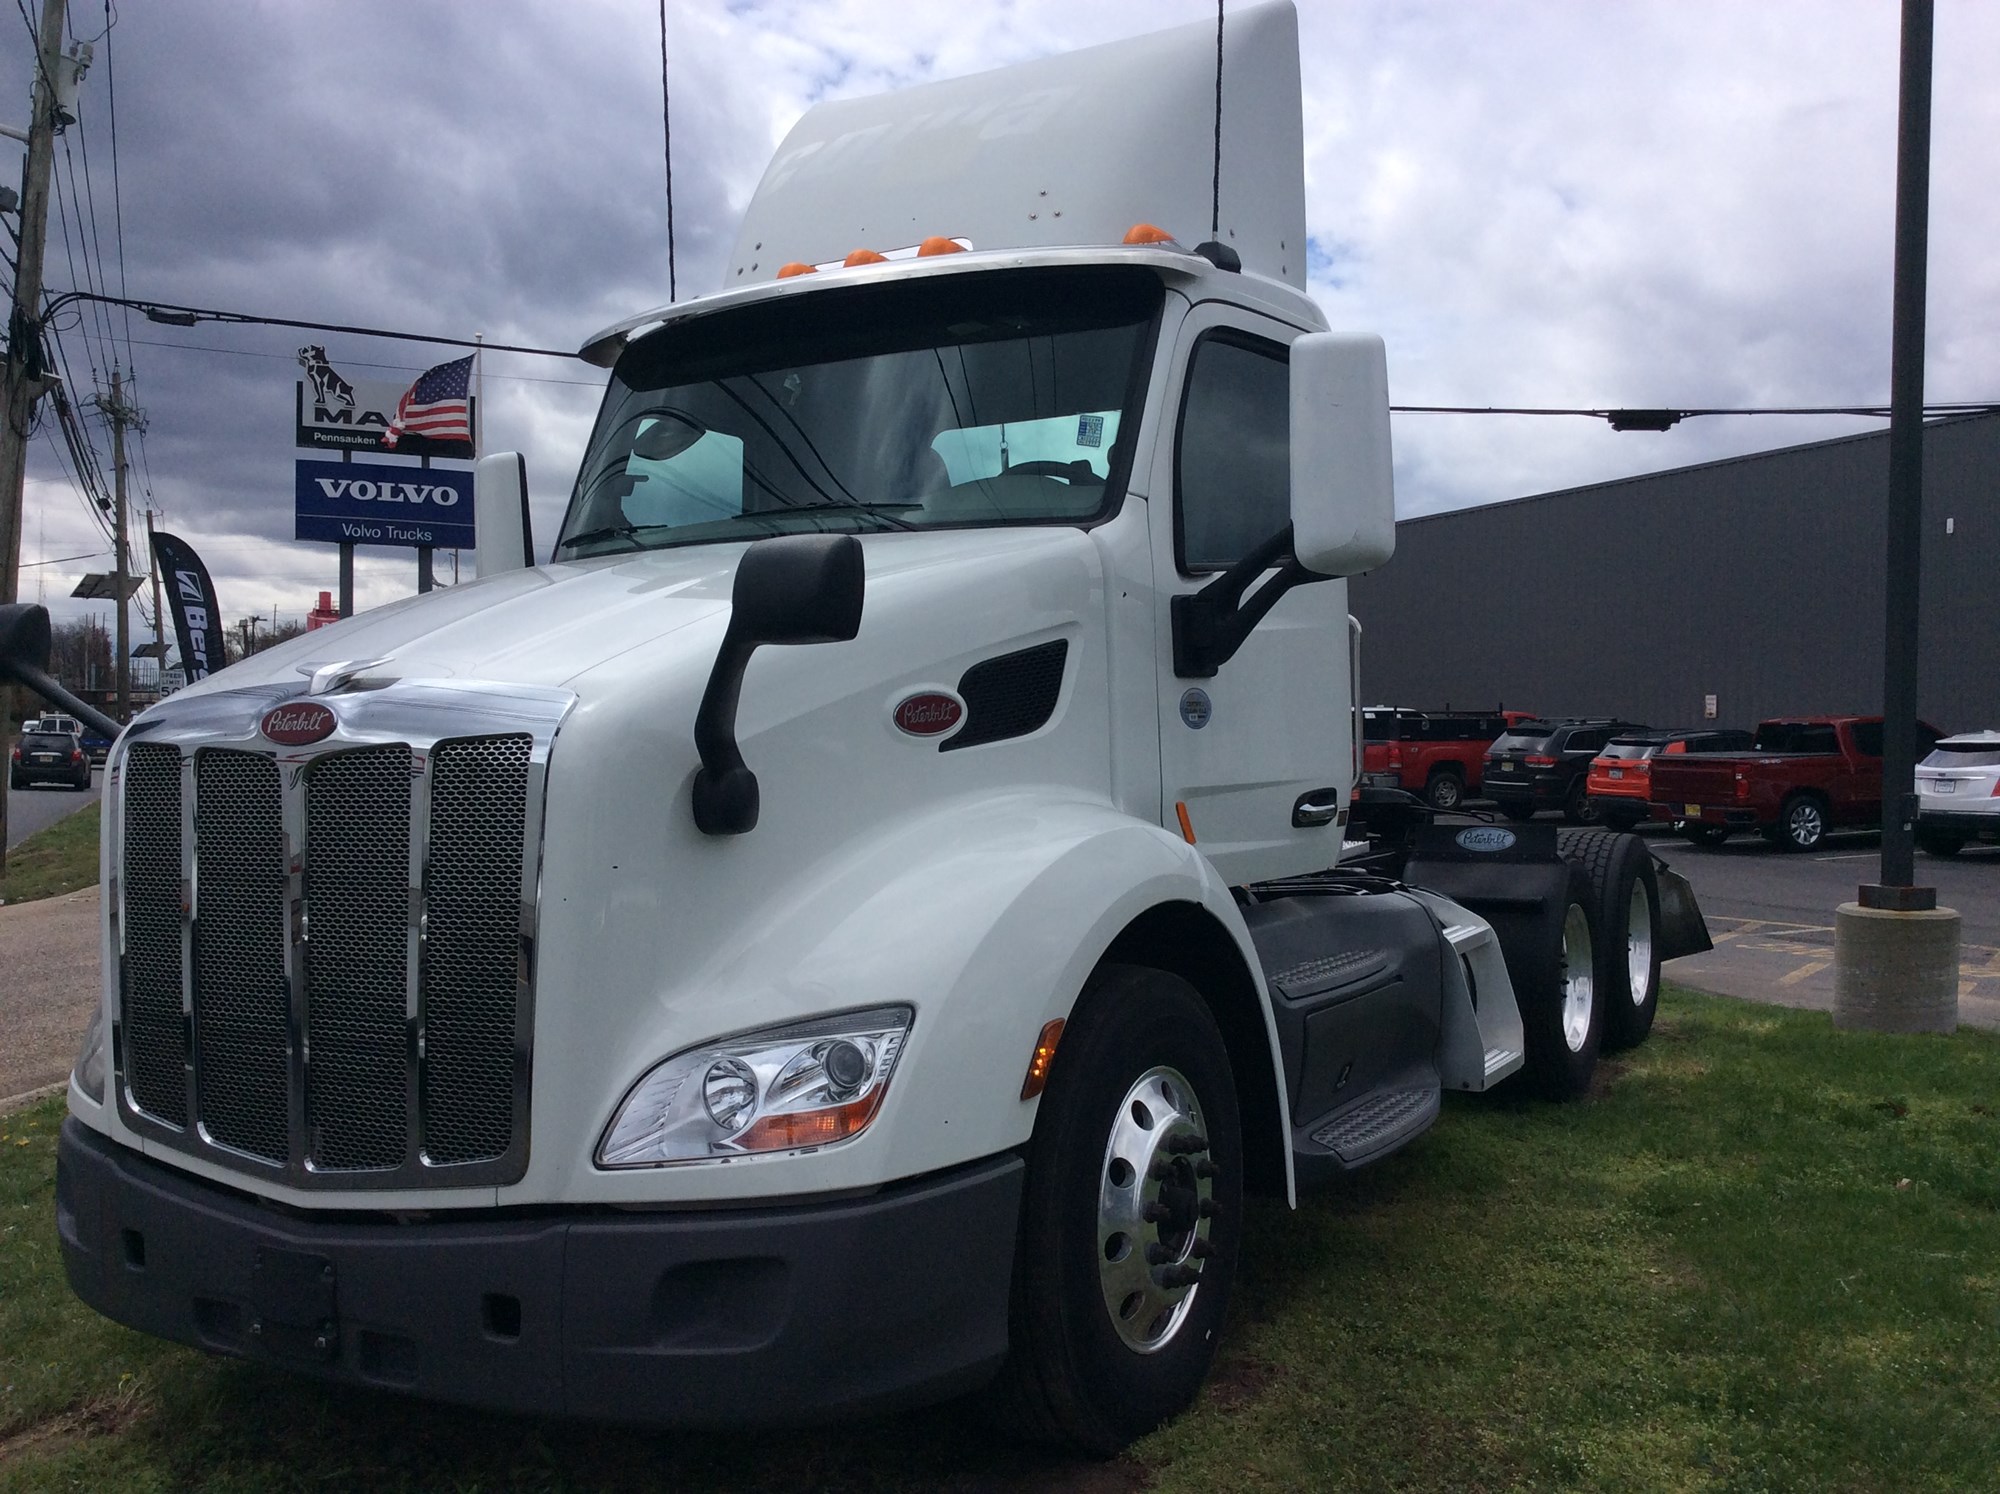 Used Truck Inventory - 1000907 01 - 59